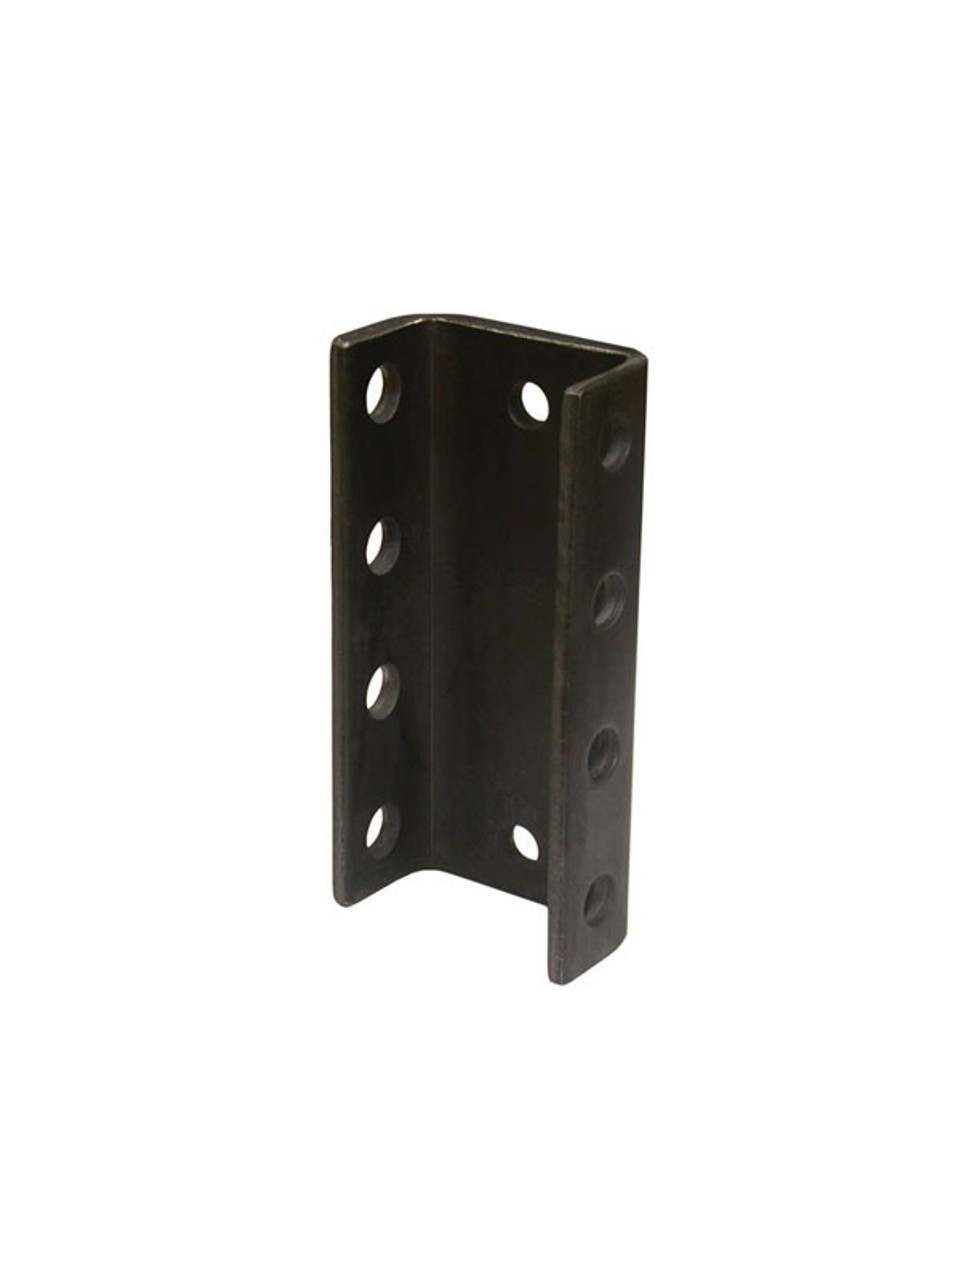 55342 --- Adjustable Channel with 4 Hole Sets - 7,500 lb - Weld On